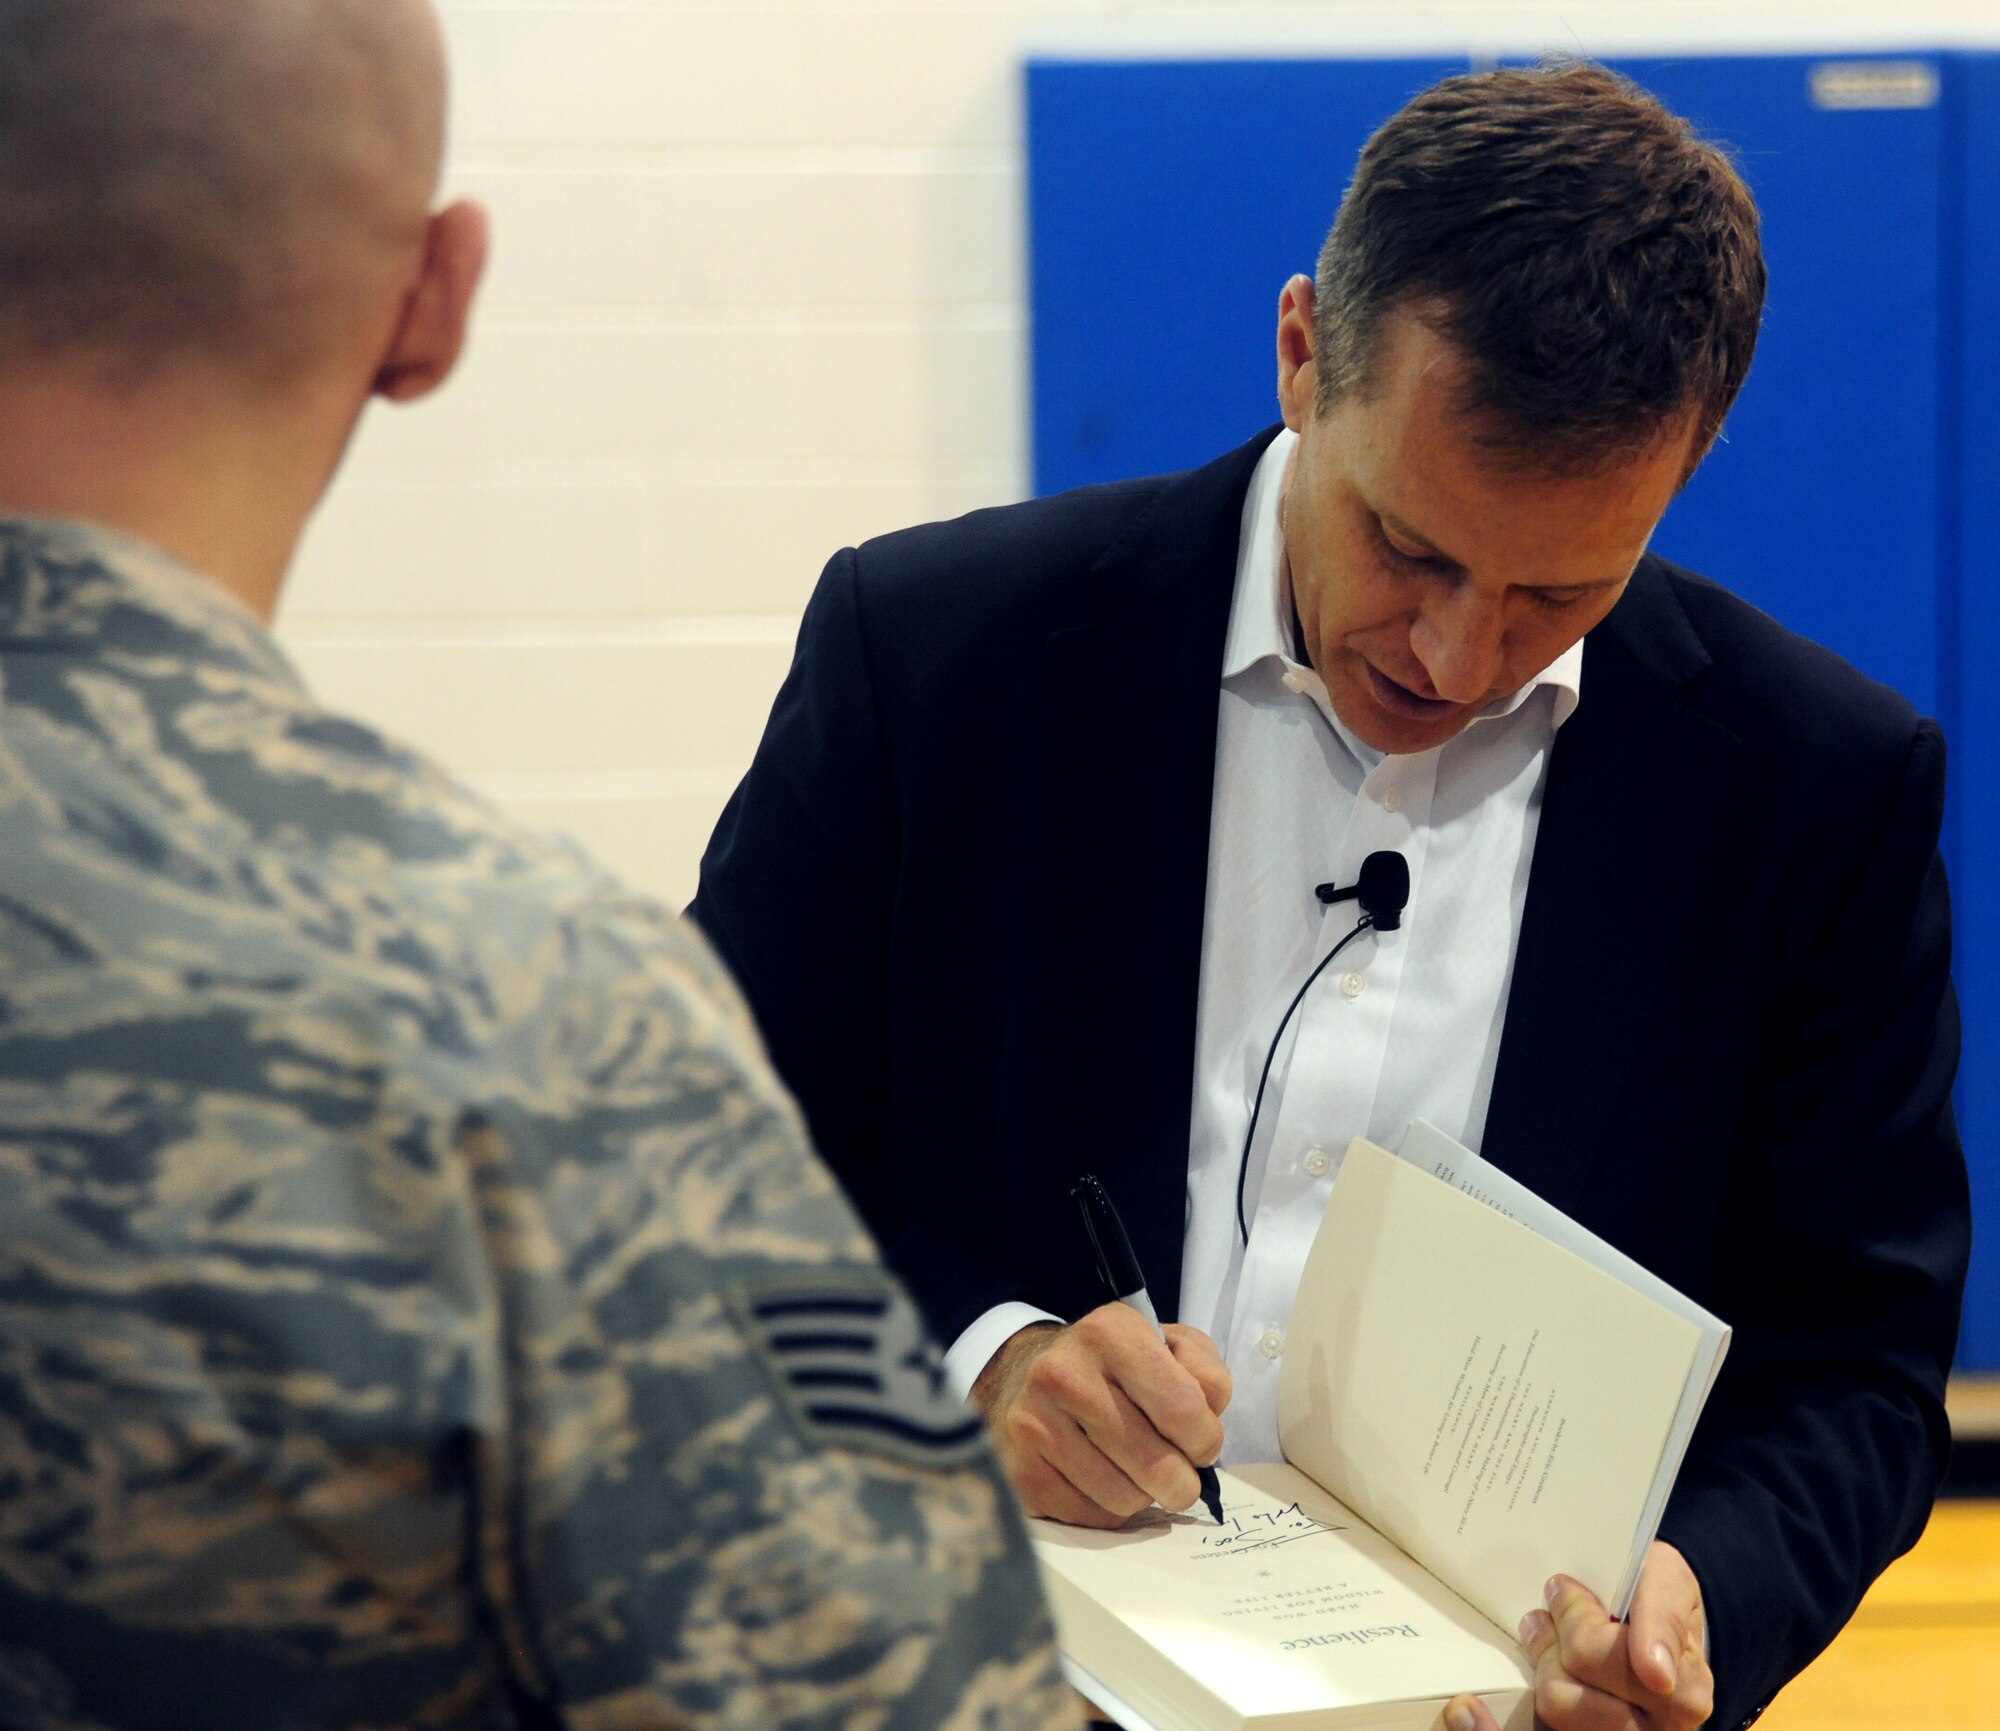 U.S. Navy veteran and chief executive officer of The Mission Continues Eric Greitens meets and greets members of Team Whiteman May 20, 2015. (U.S. Air Force photo by Airman 1st Class Jovan Banks/Released)